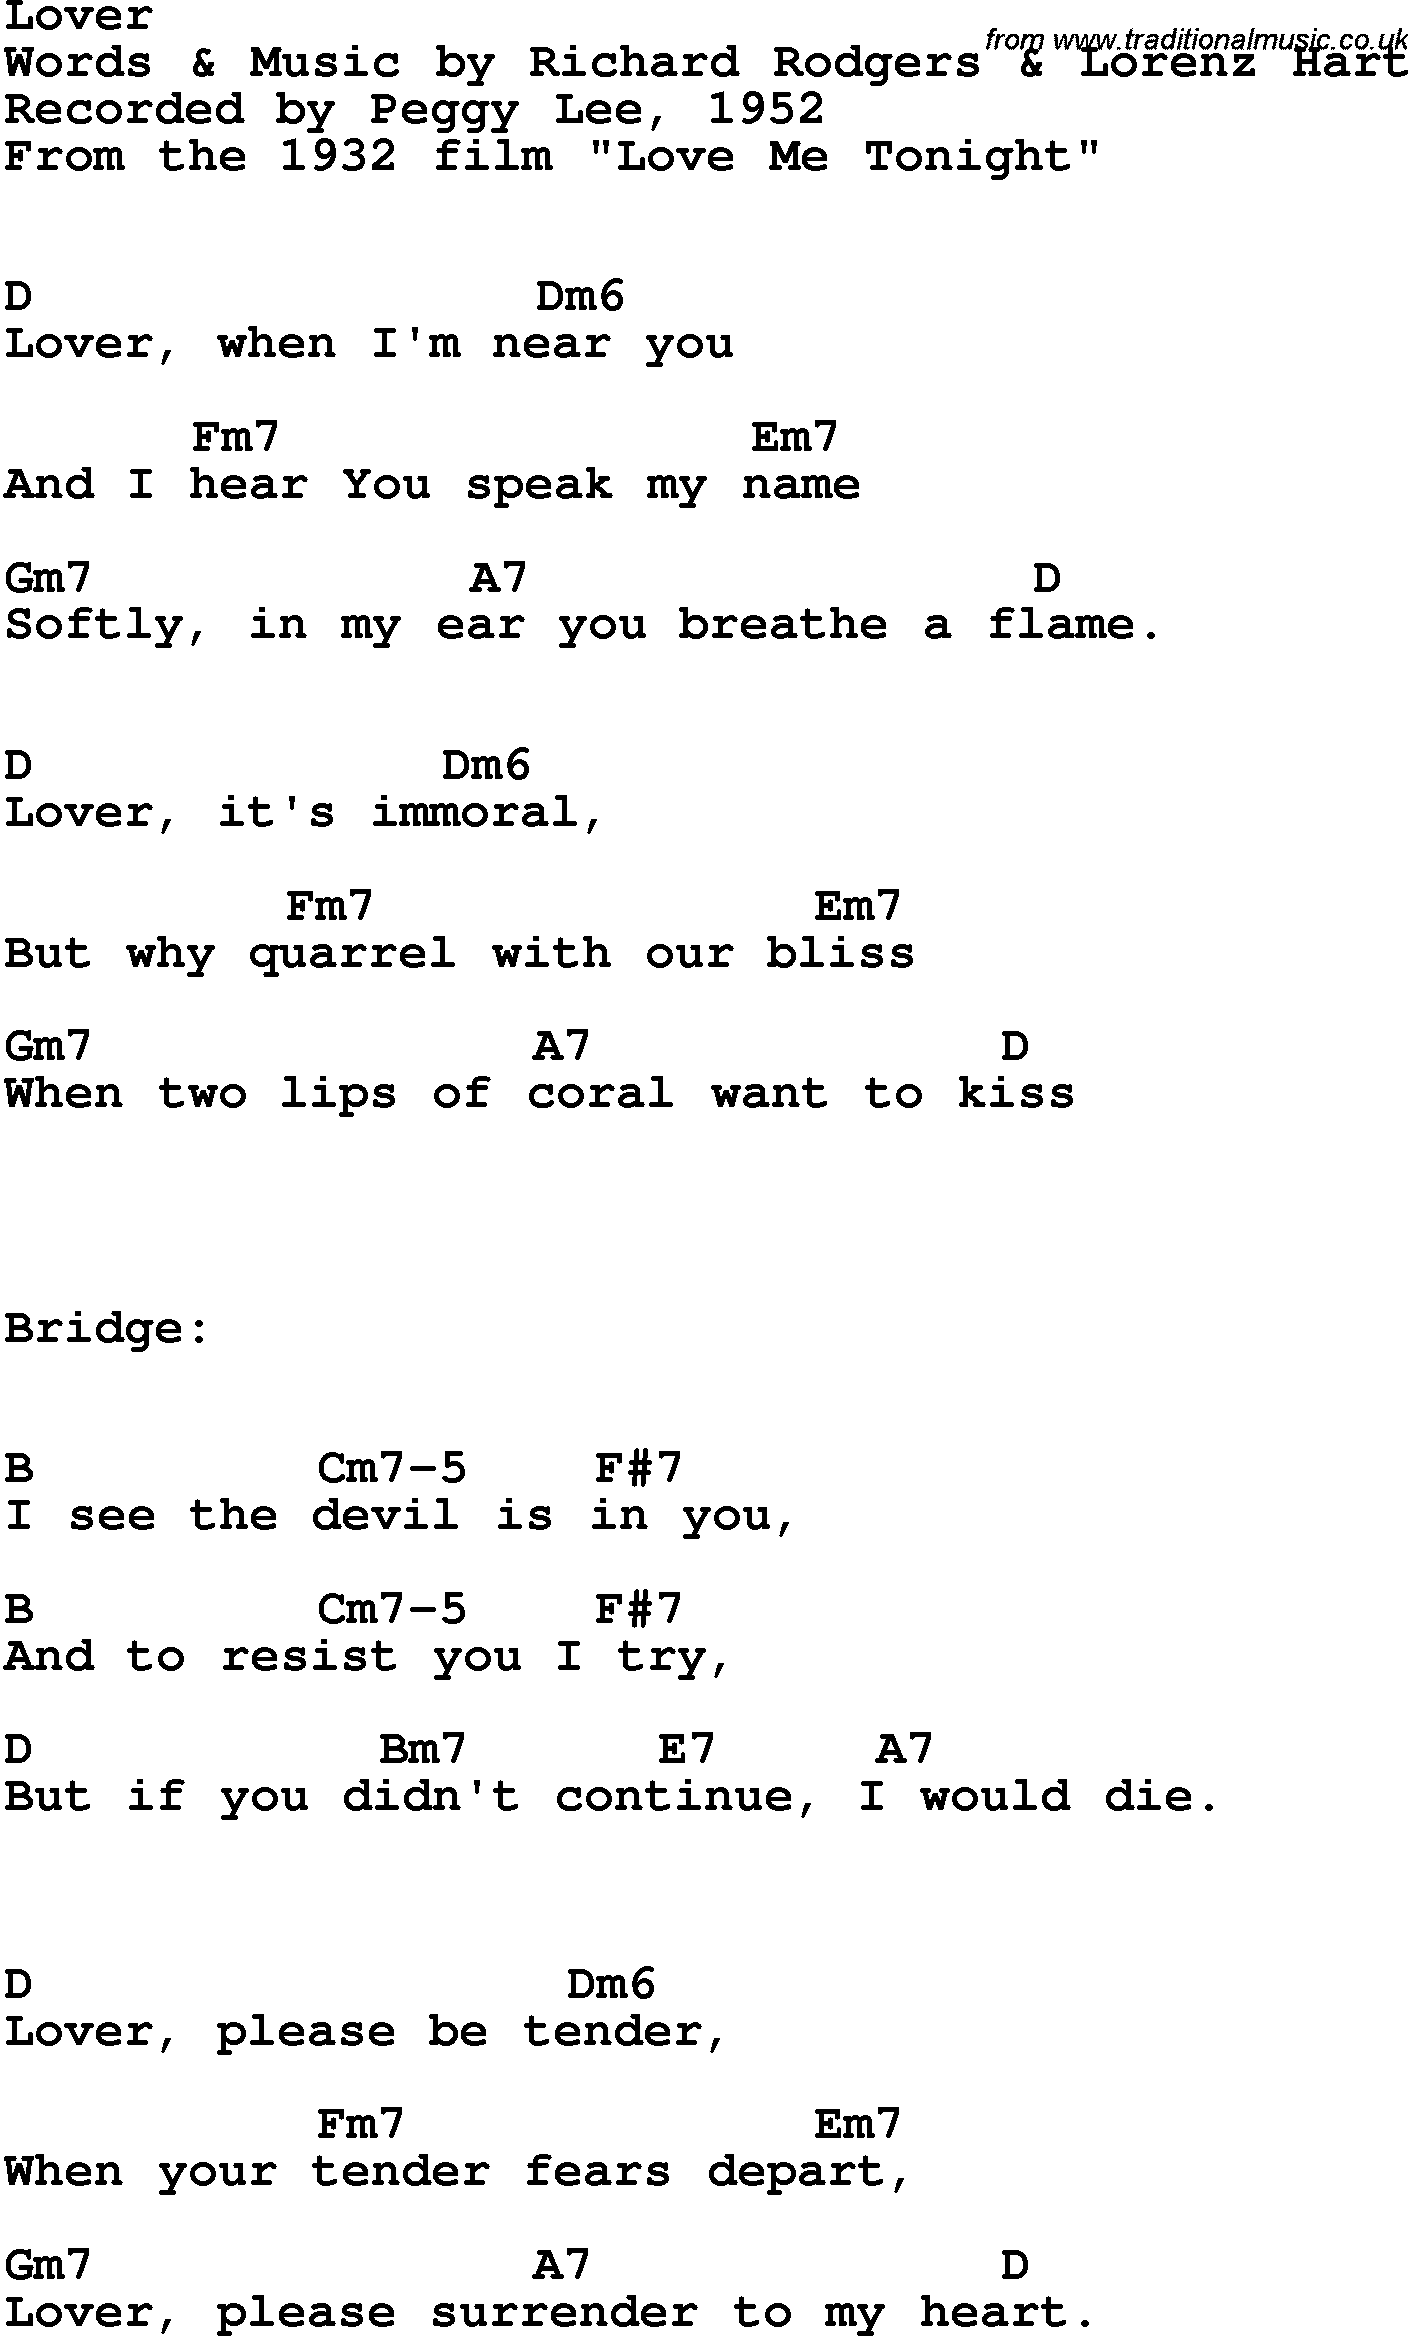 Song Lyrics with guitar chords for Lover - Peggy Lee, 1951